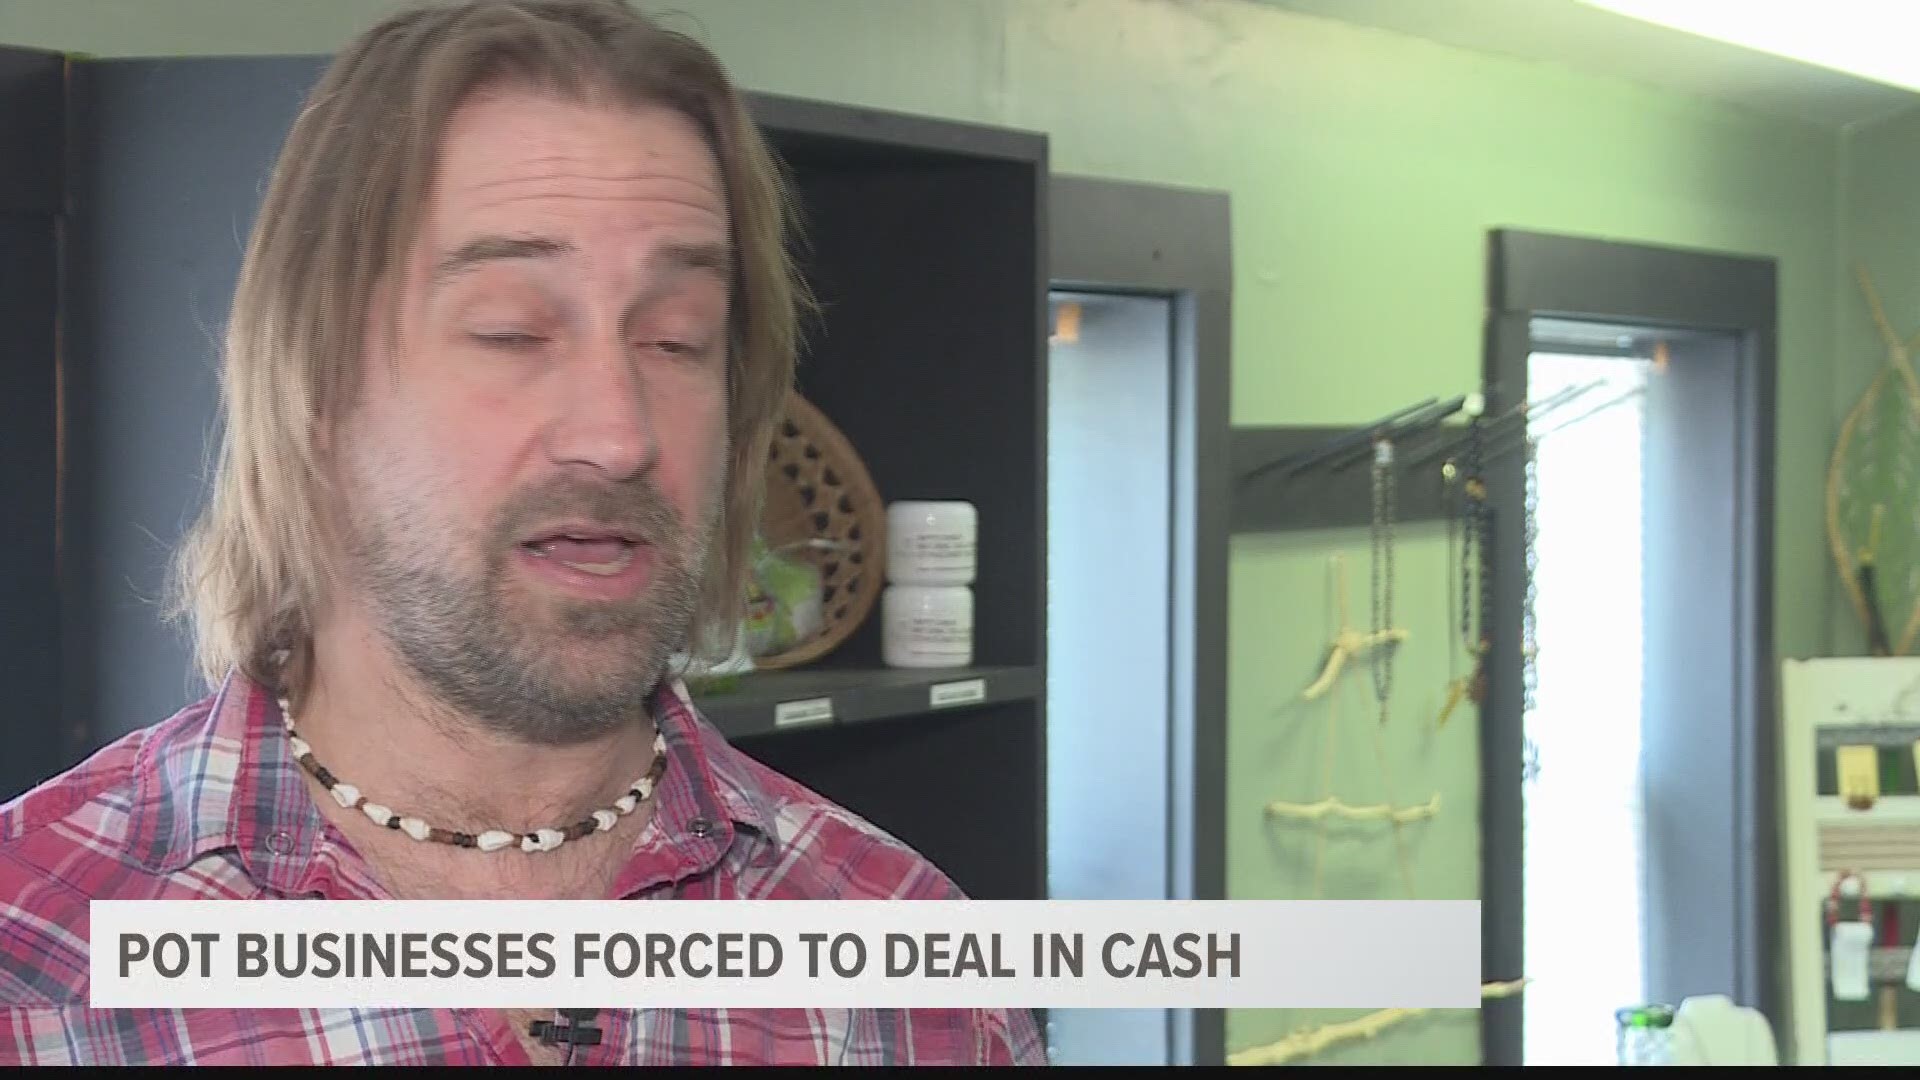 Pot businesses are forced to deal with cash because banks could risk federal penalties if they service marijuana business.